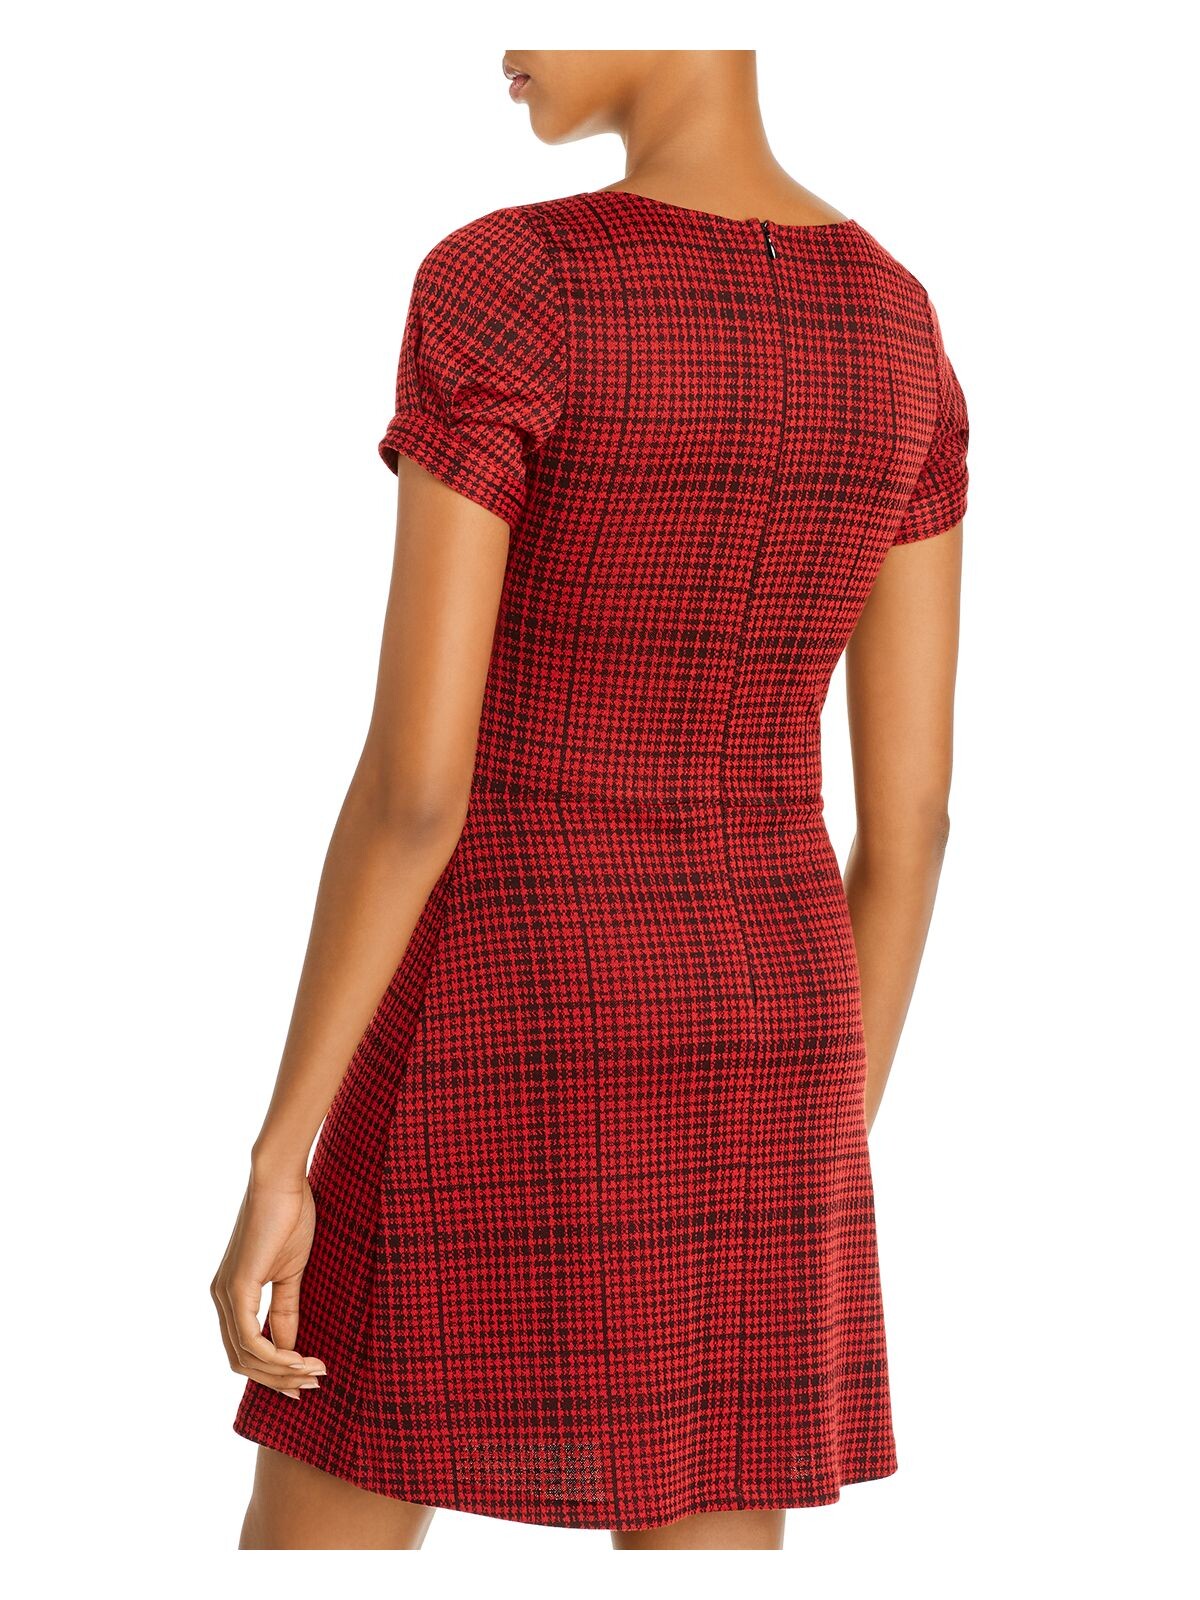 AQUA Womens Red Houndstooth Pouf Square Neck Short Fit + Flare Dress Size: M